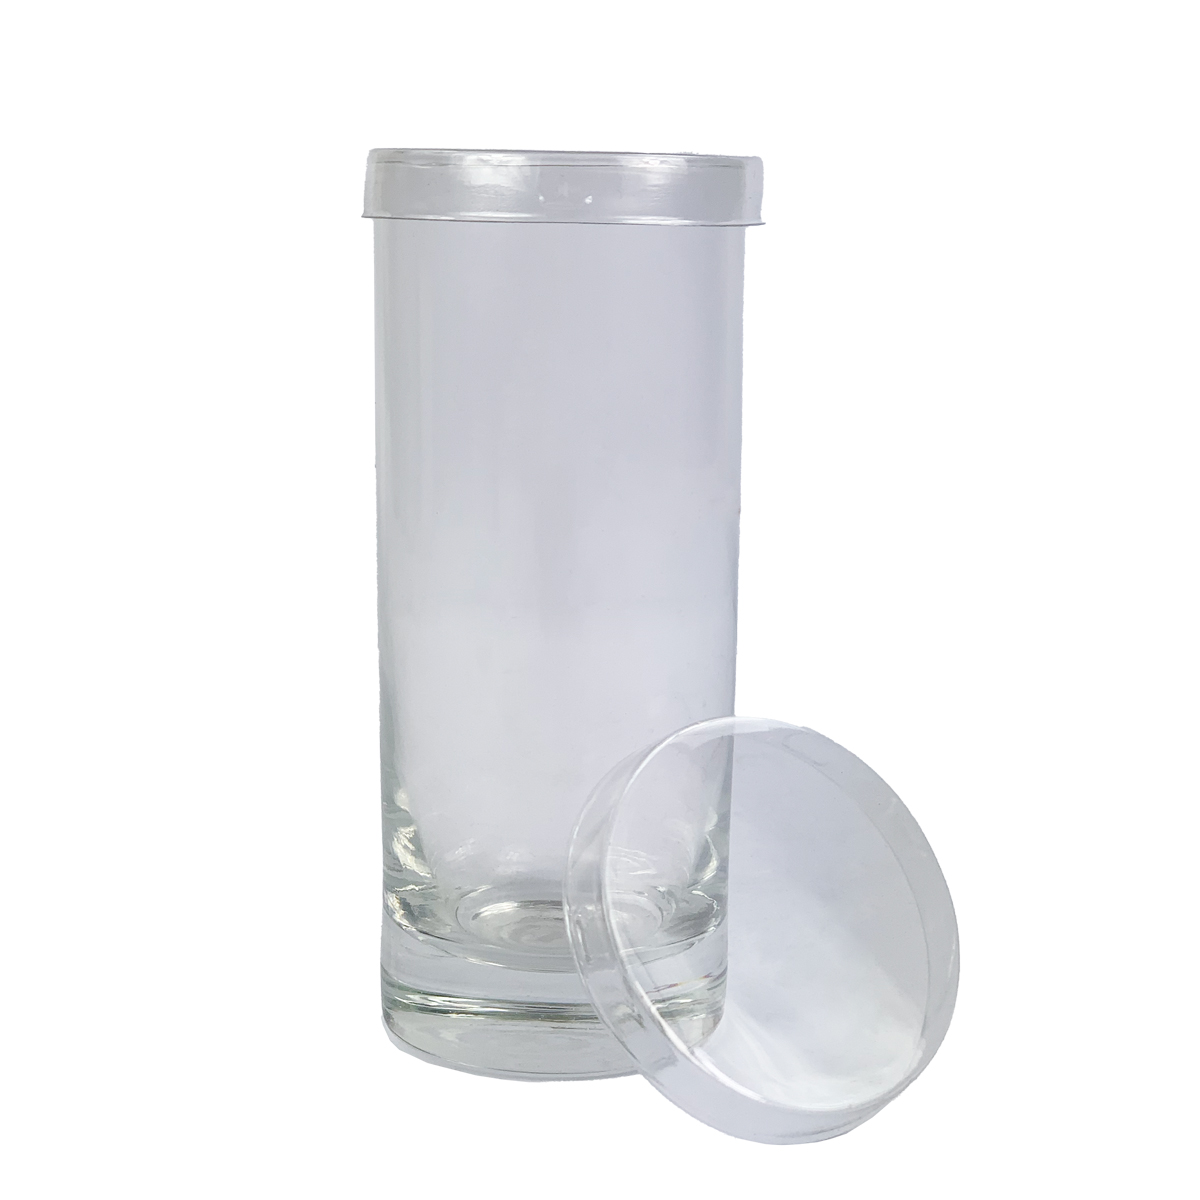 Candle Making Supplies  PVC CANDLE JAR LIDS - FITS TALL GLASS 1000 PCS -  Candle Making Supplies